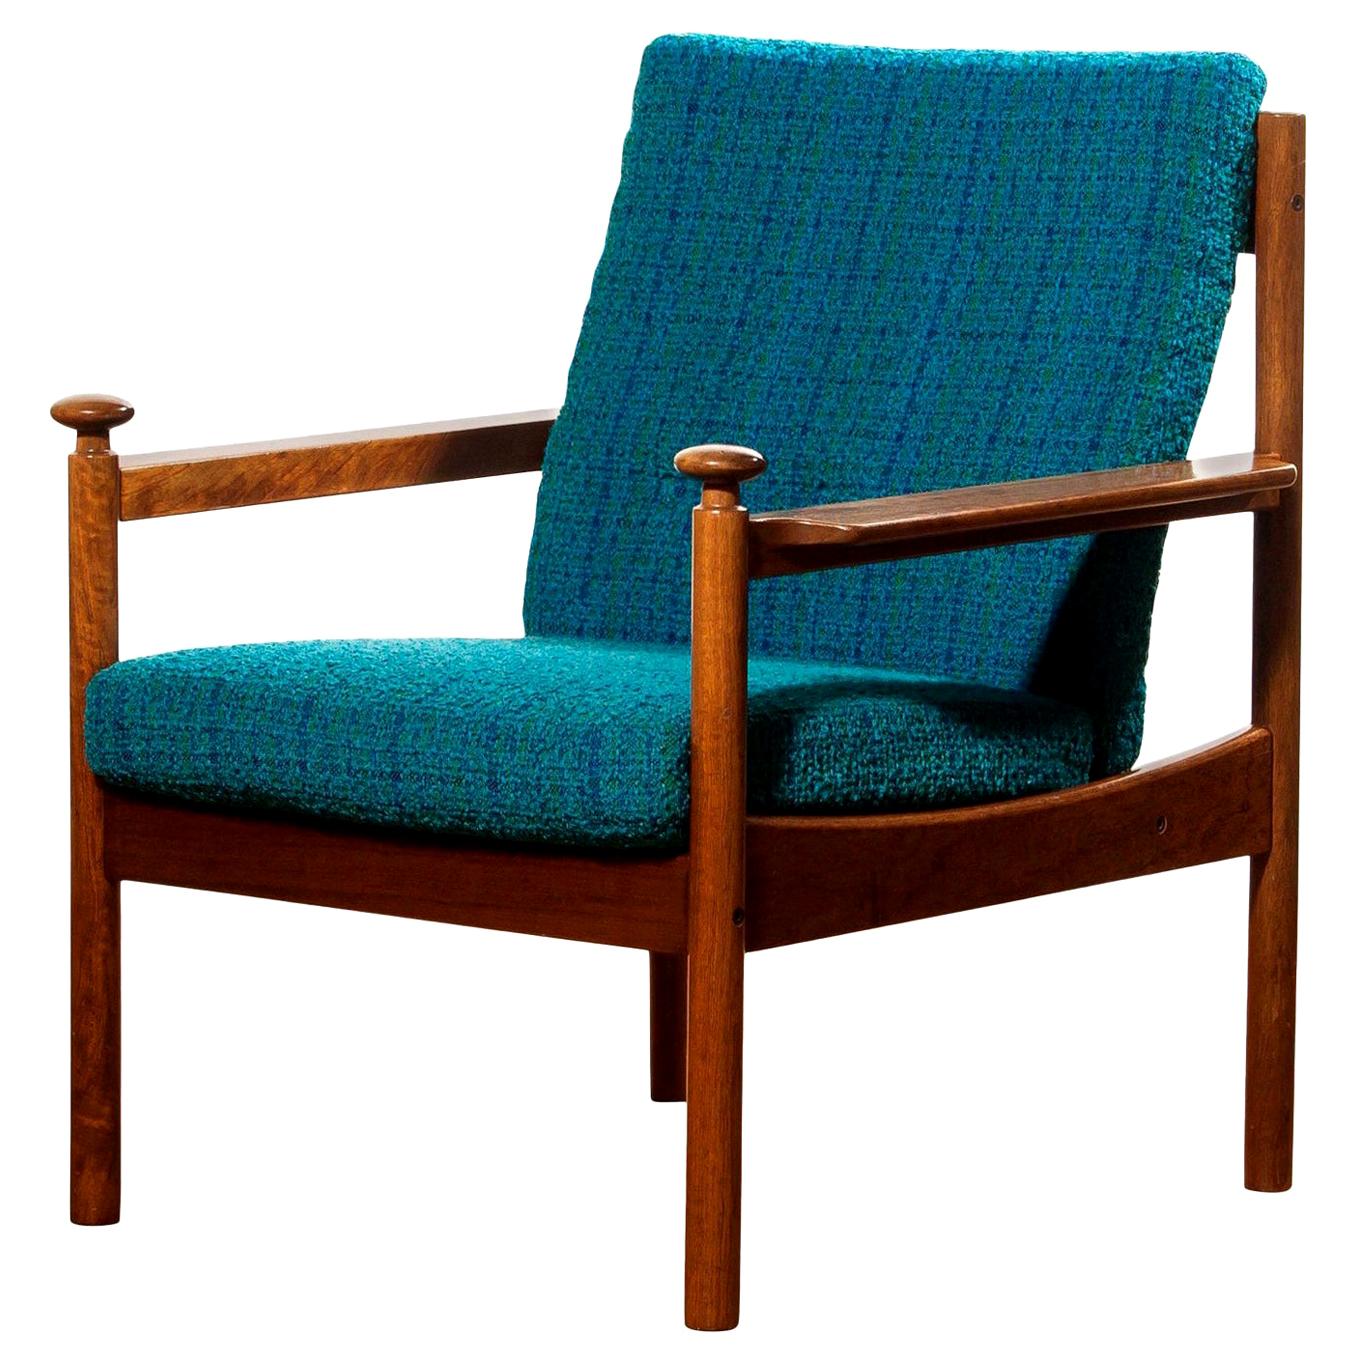 Beautiful chair designed by Torbjørn Afdal for Sandvik & Co. Mobler, Norway.
The wooden frame with the blue fabric cushions makes it a very nice combination.
The frame is in a good condition, only the cushions need a refilling.
Period: